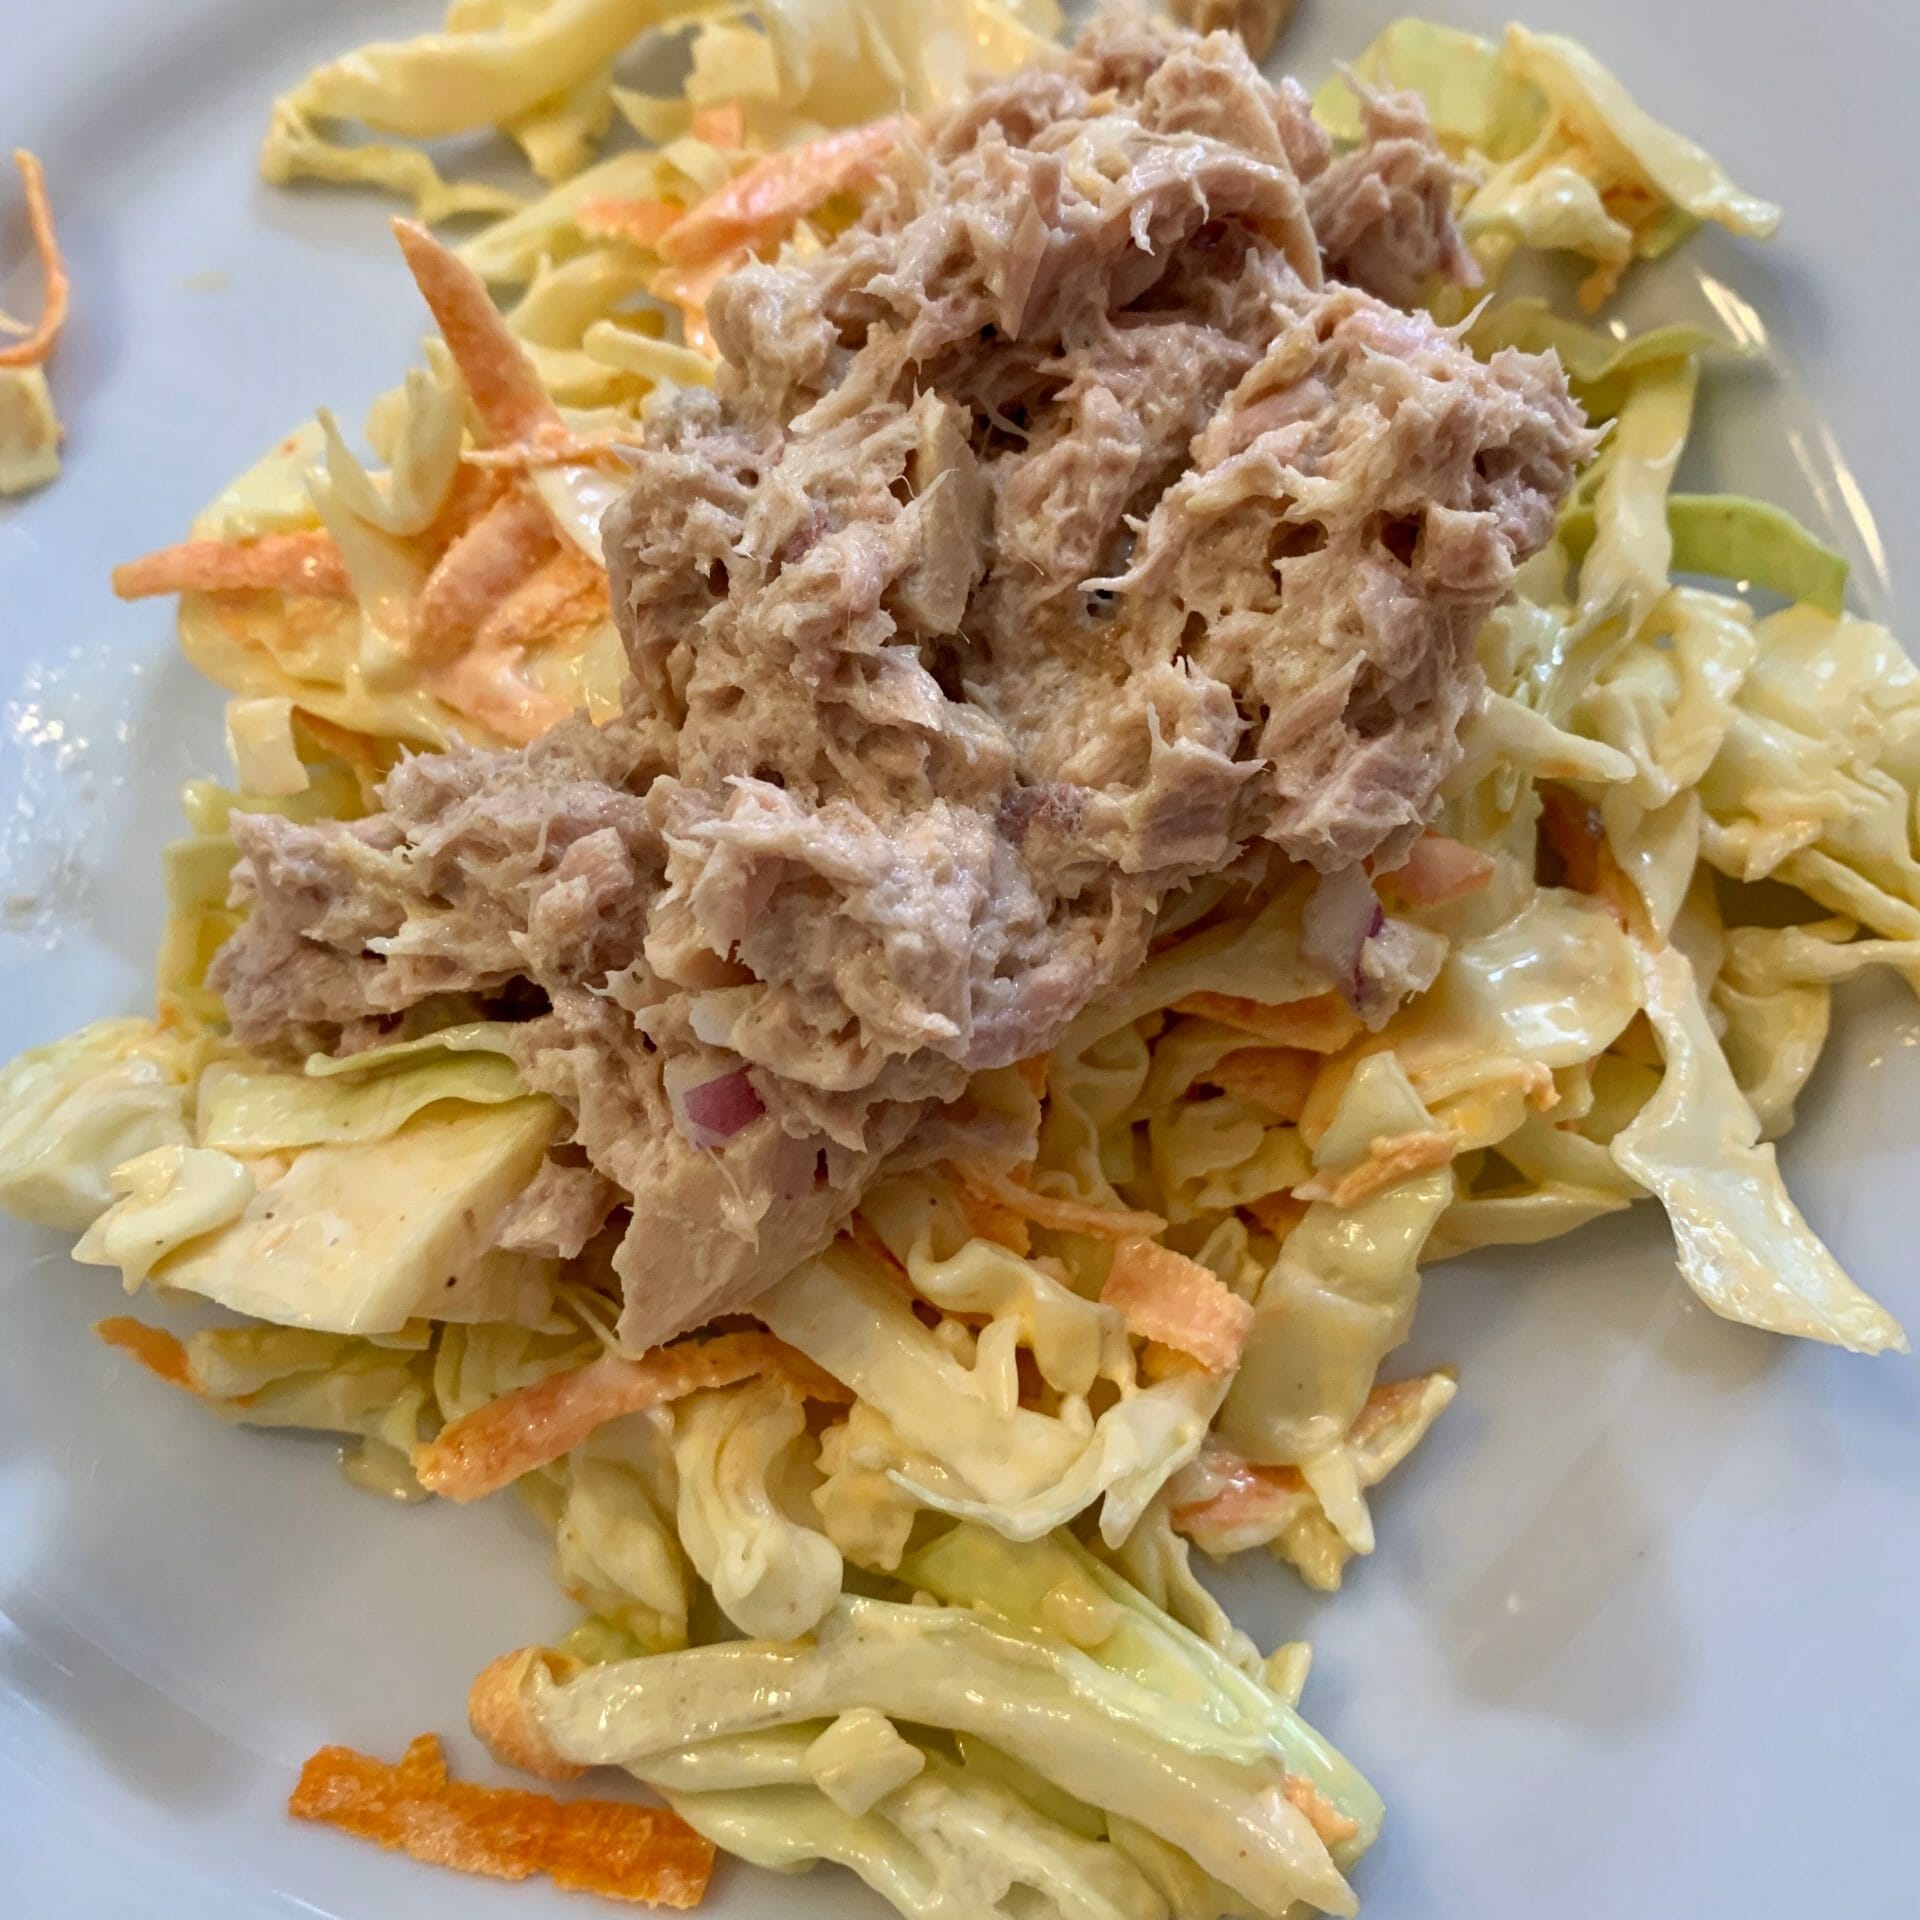 Cabbage with canned tuna, onions and avocado-oil mayonnaise